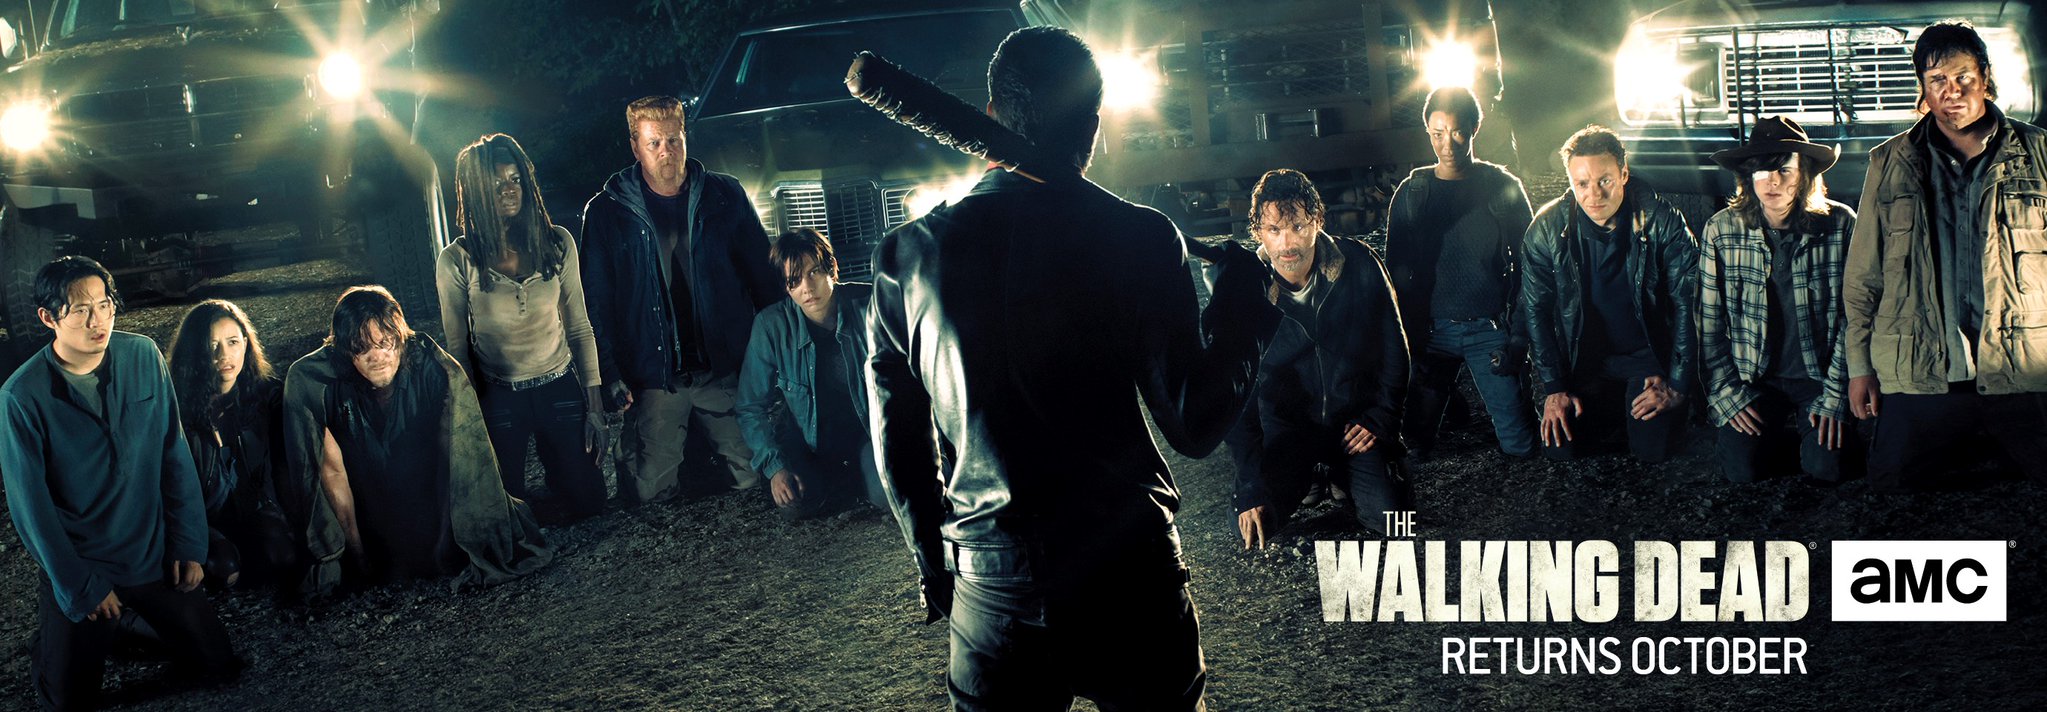 TWDPOSTER